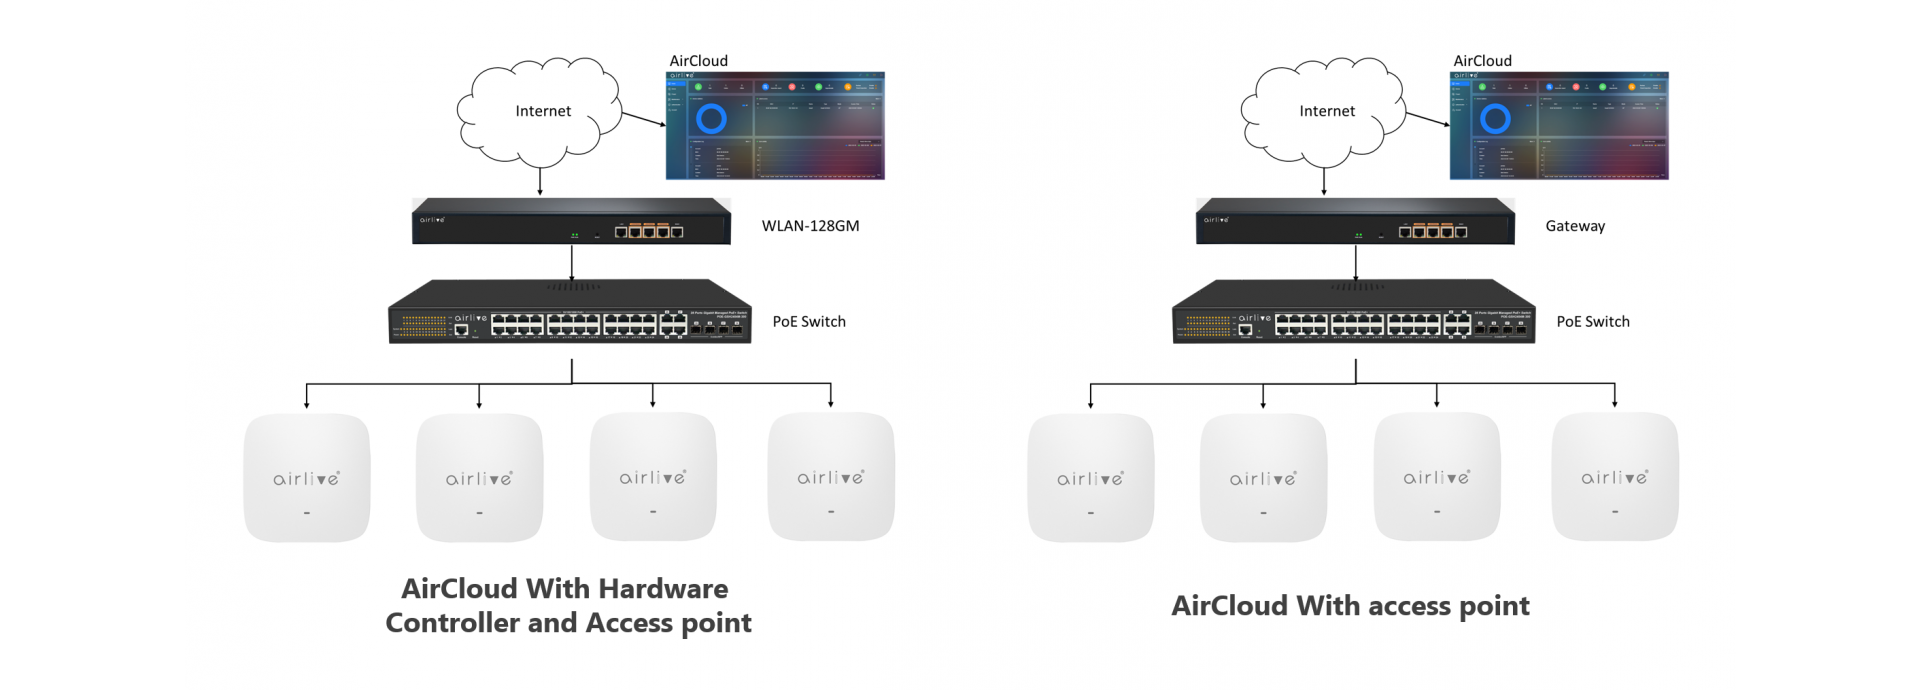 Powerful Tool for Large Scale Wireless deployment and Application